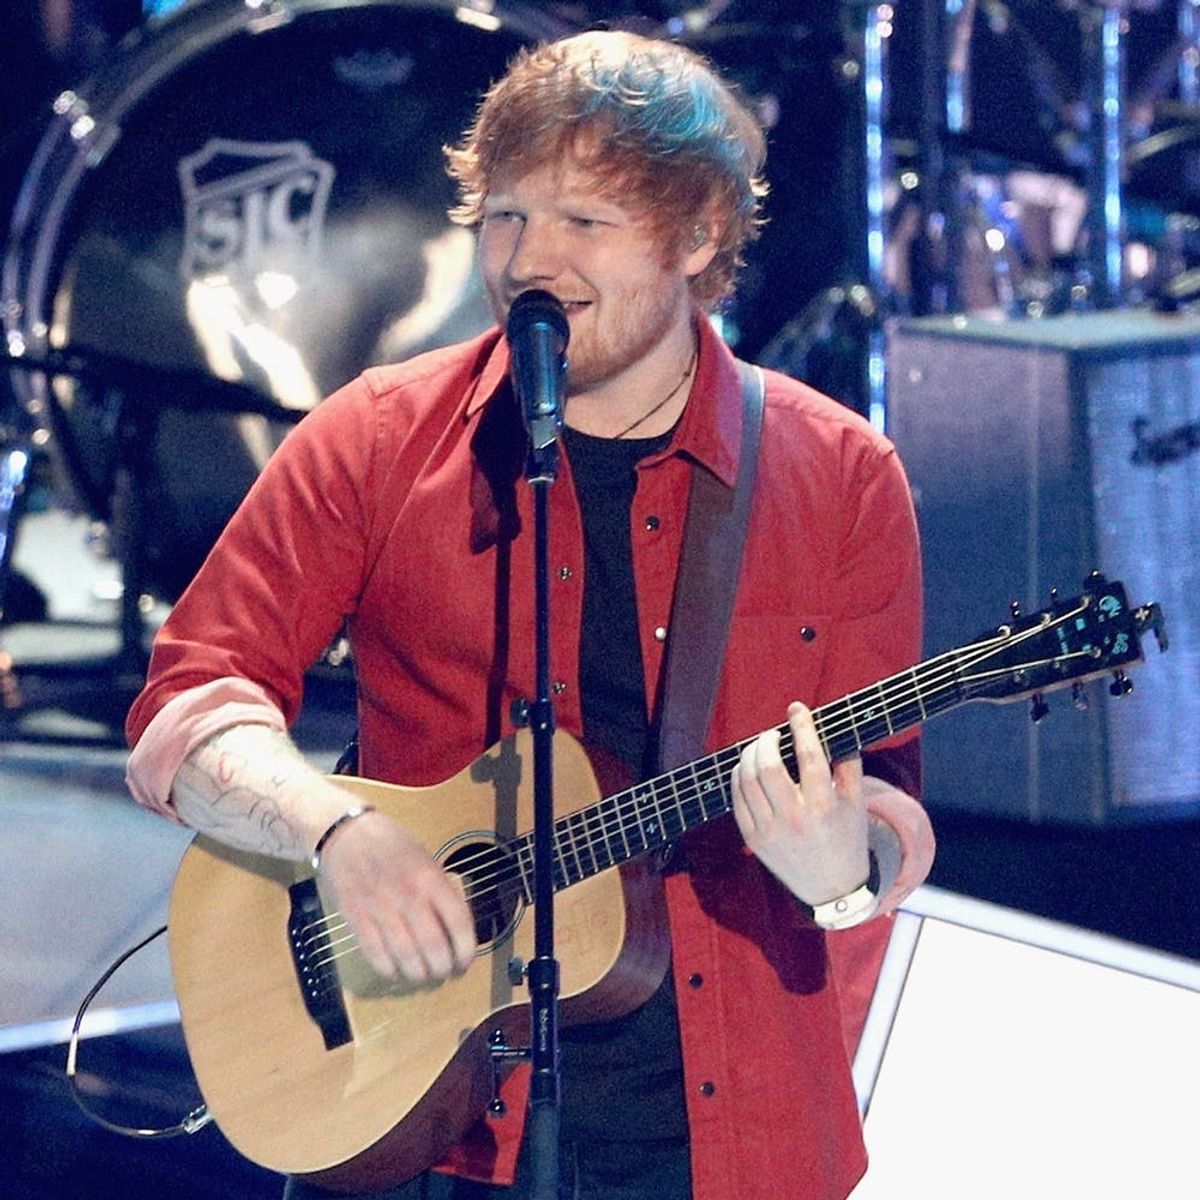 Ed Sheeran Cancels Several Tour Dates After Fracturing Both of His Arms